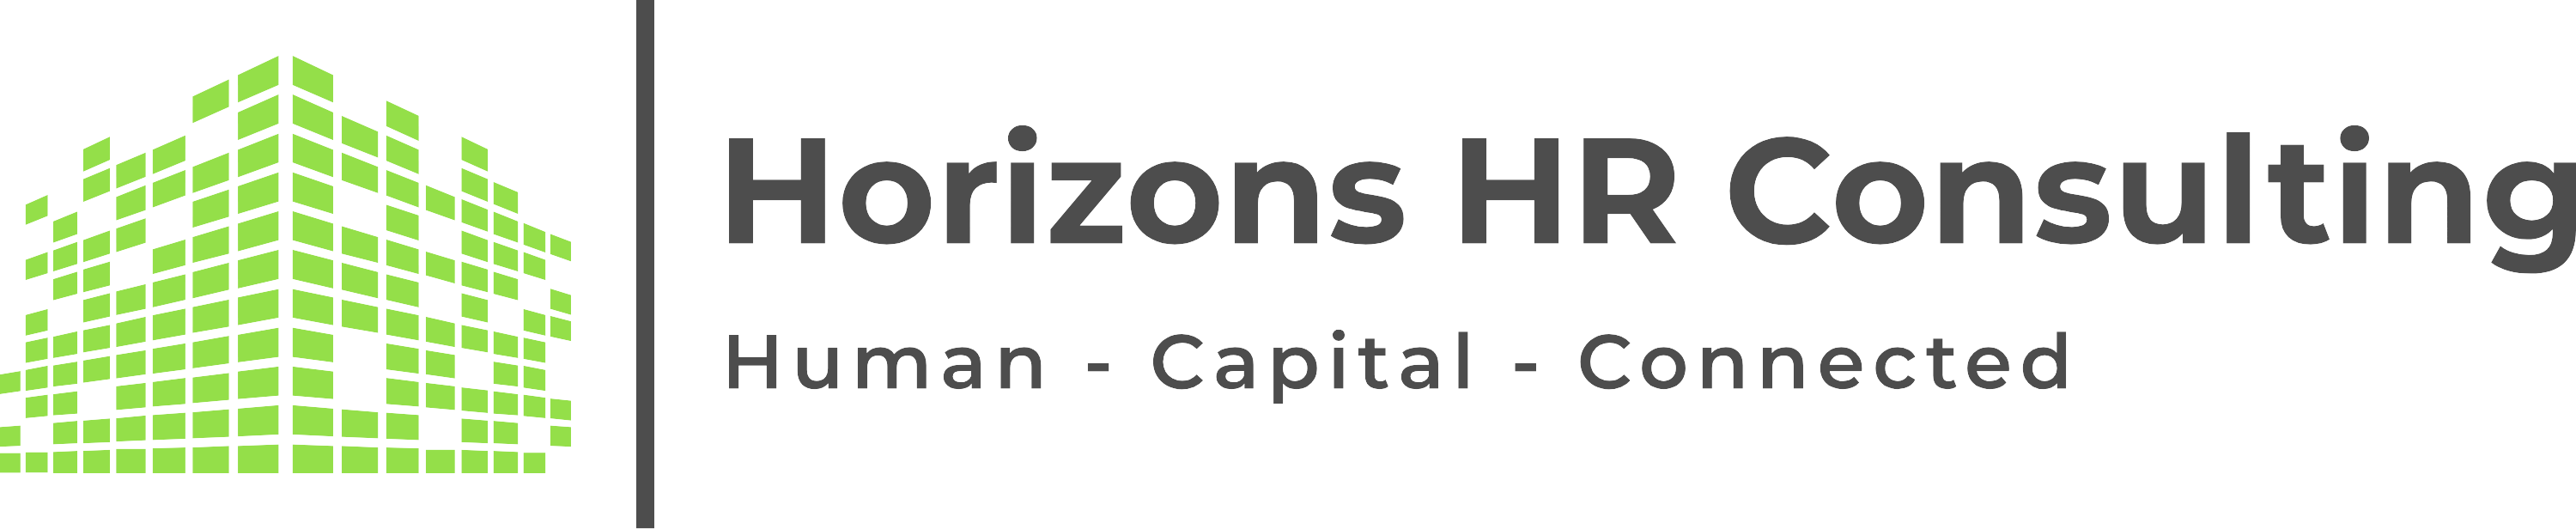 Horizons HR Consulting